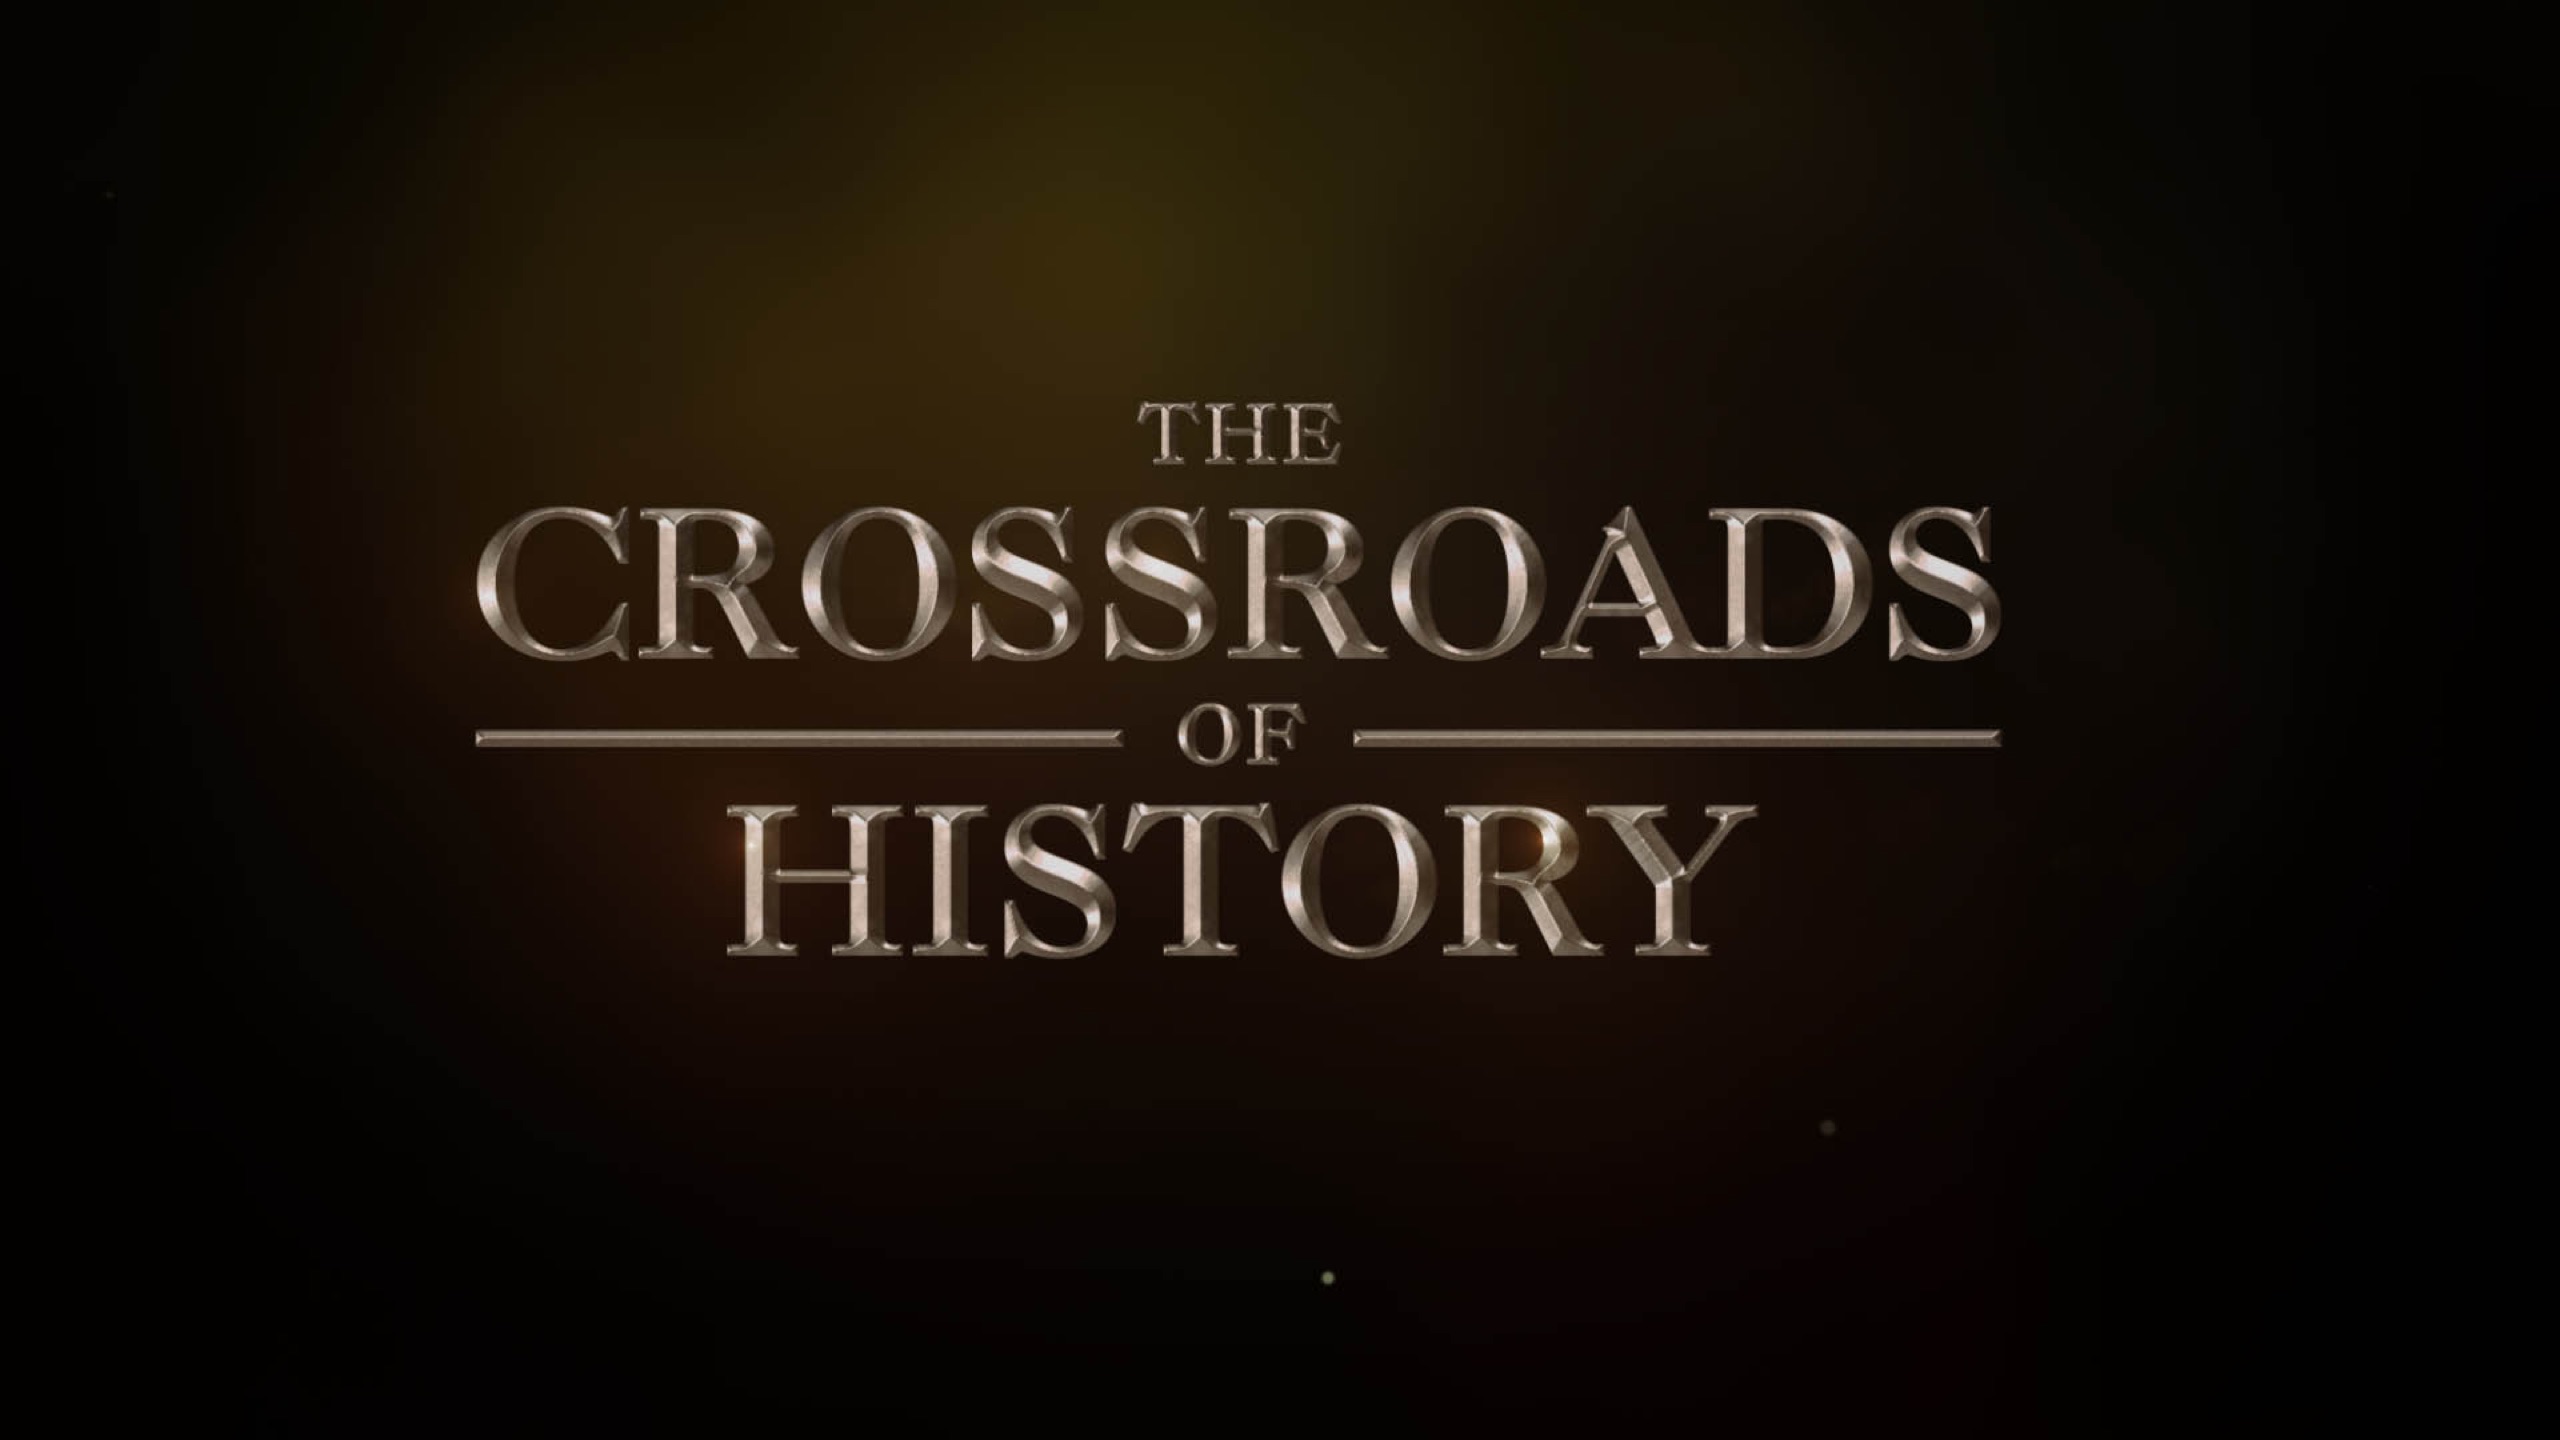 The Crossroads of History